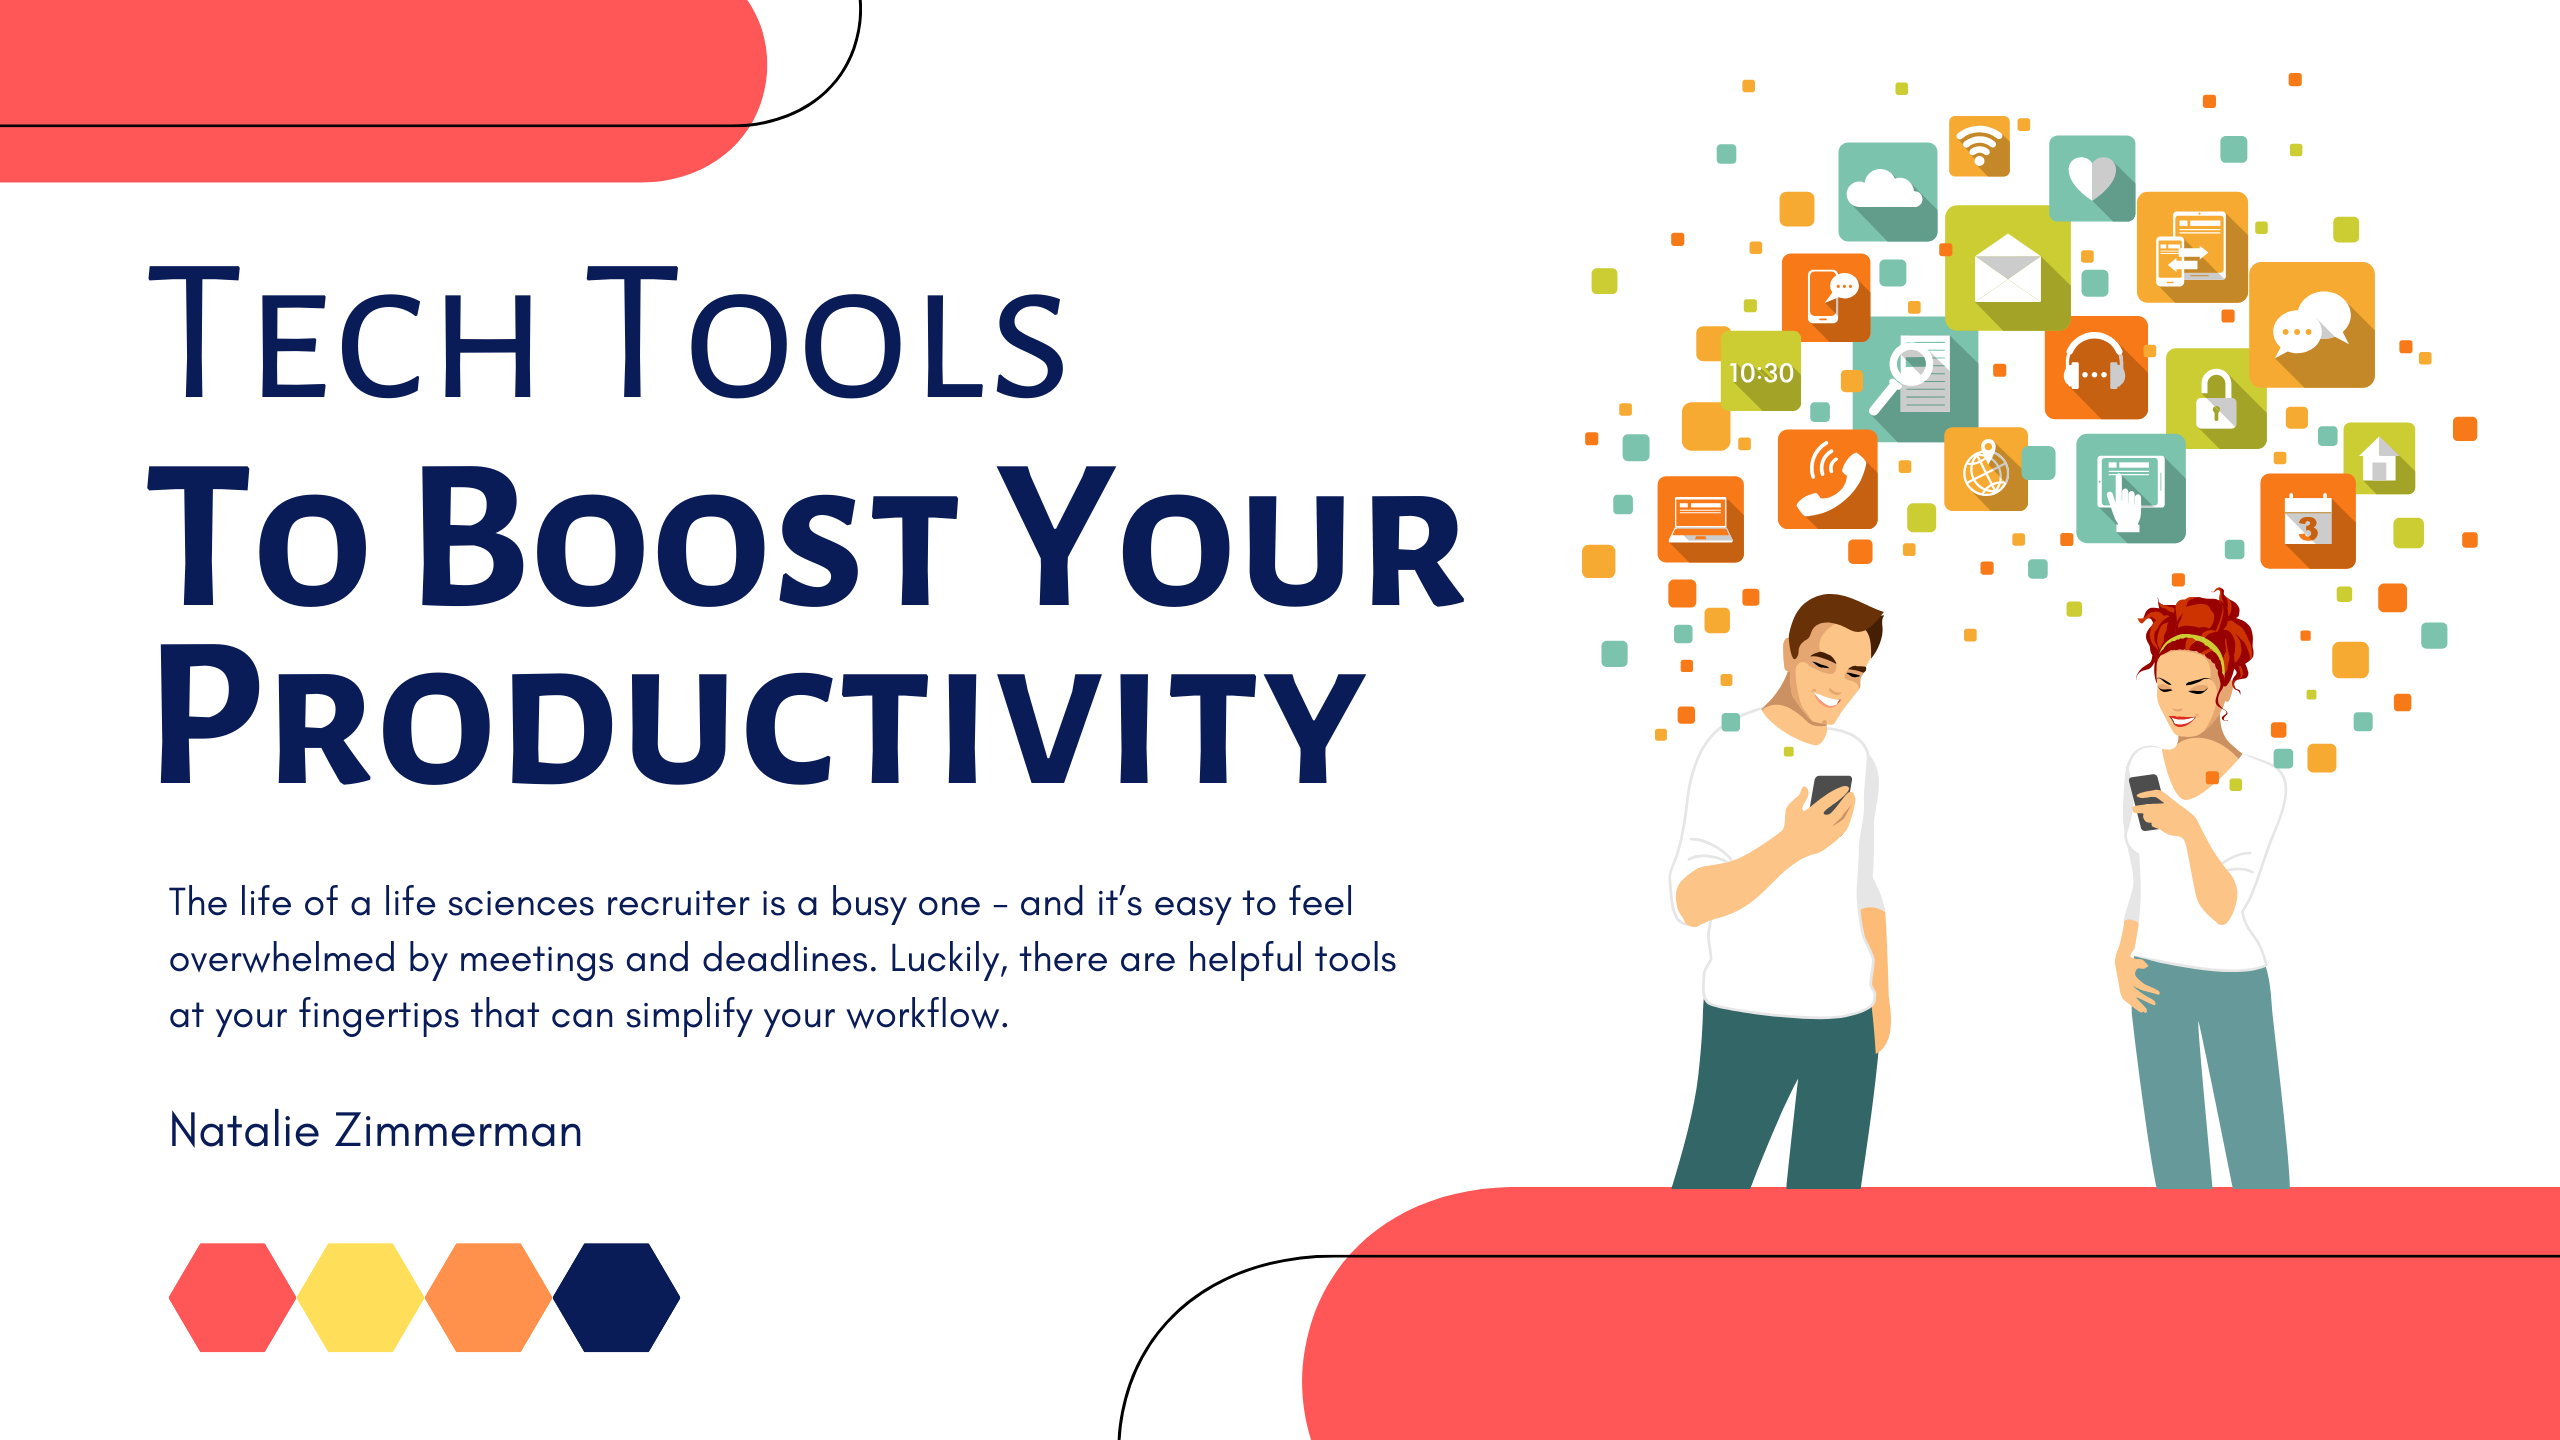 Tech Tools to Boost Your Productivity